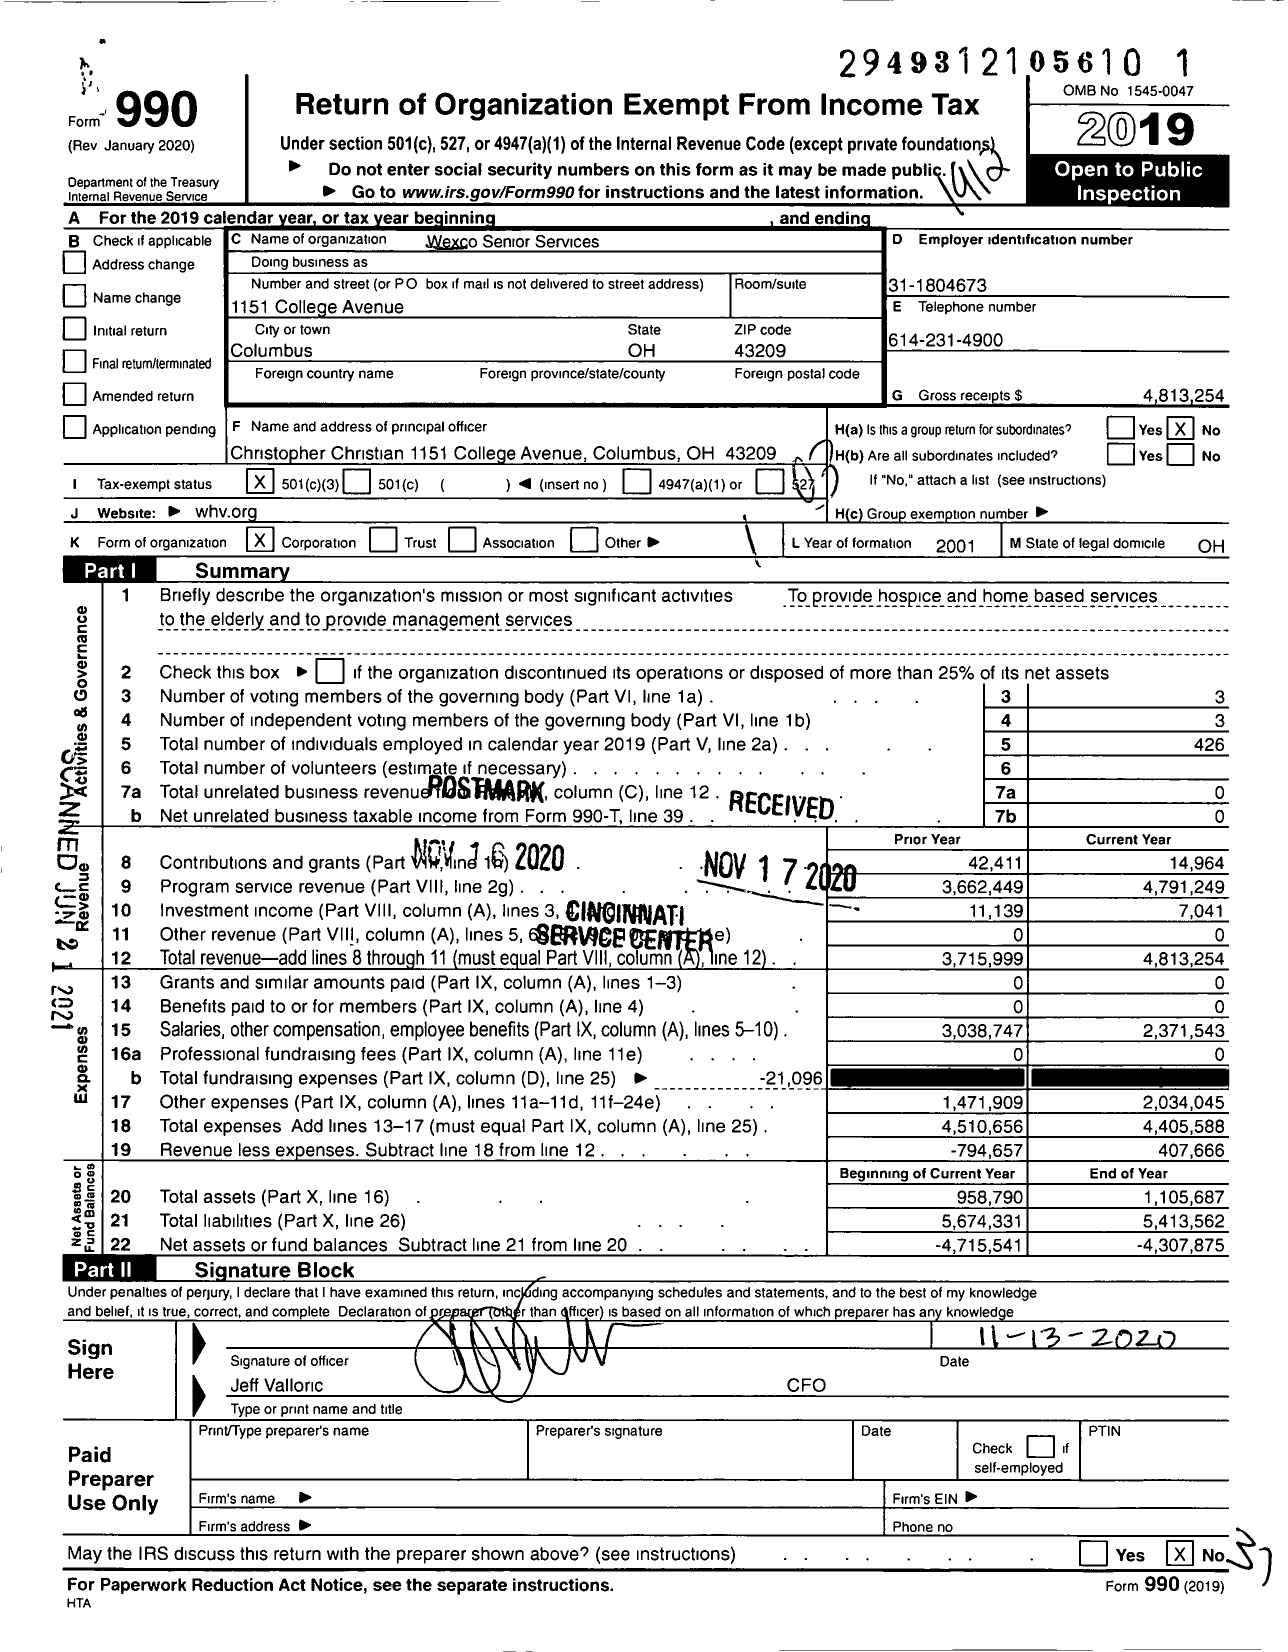 Image of first page of 2019 Form 990 for Wexco Senior Services